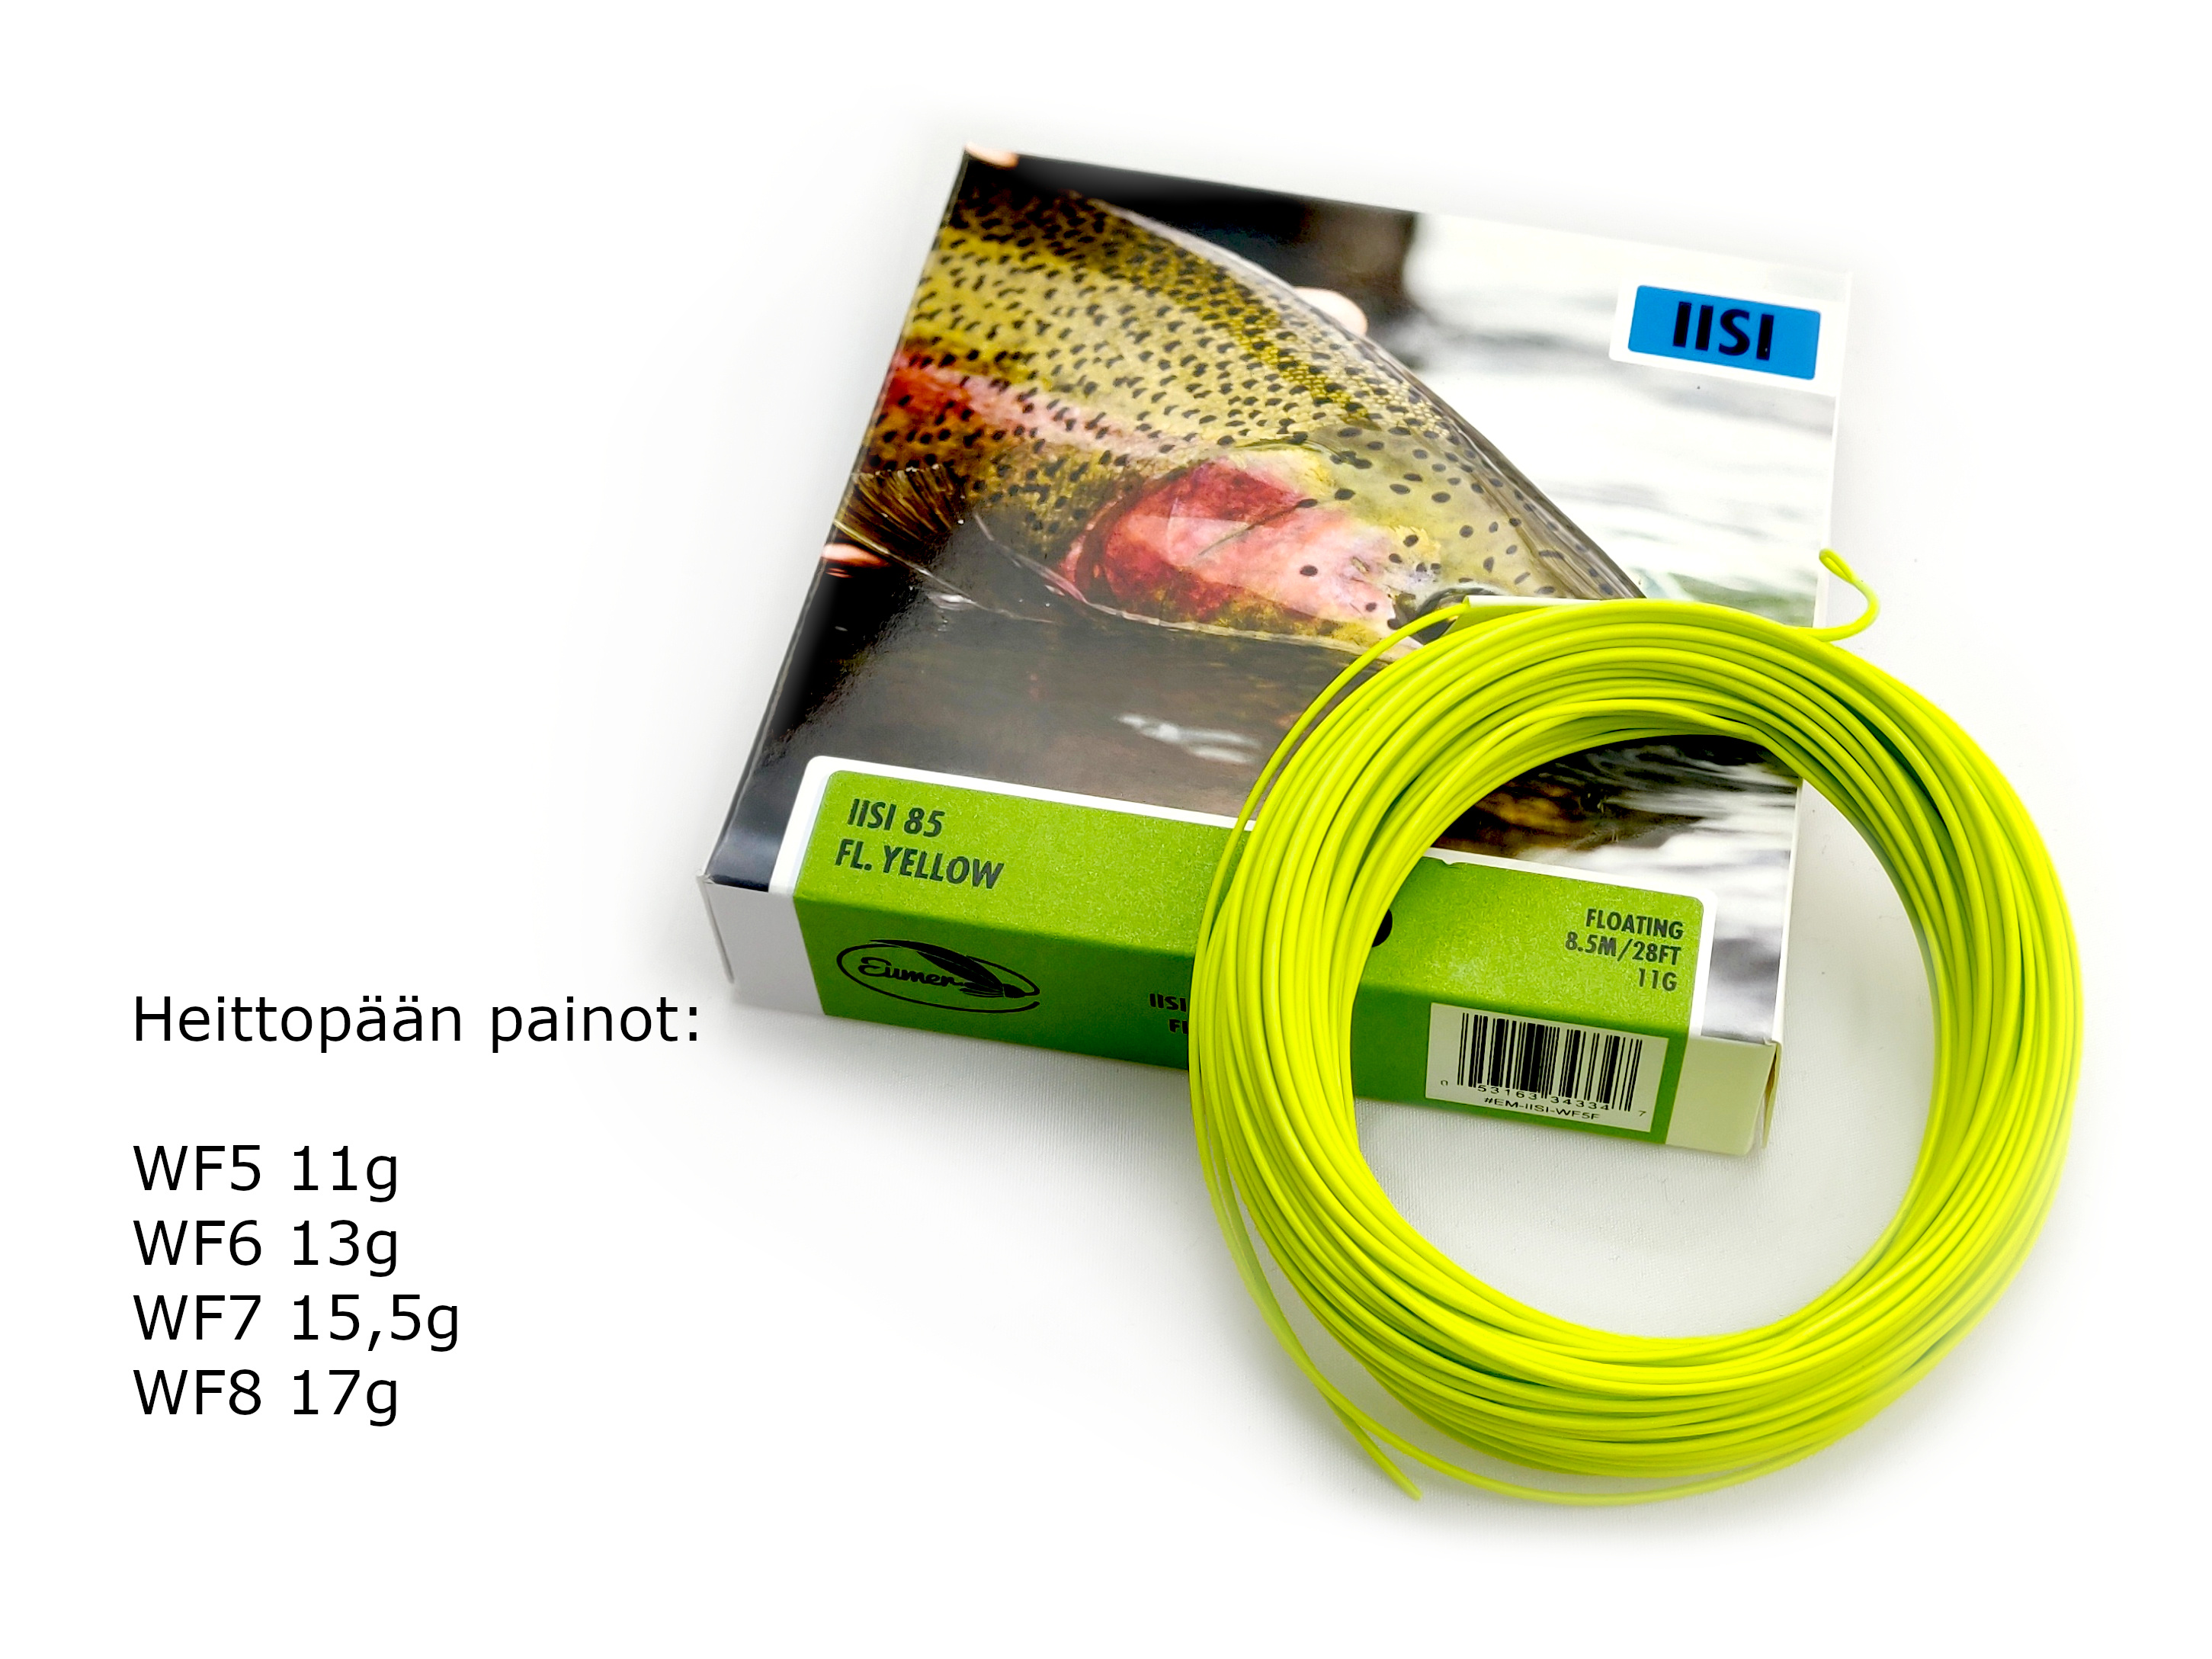 Classic Iisi fly line float - Eumer